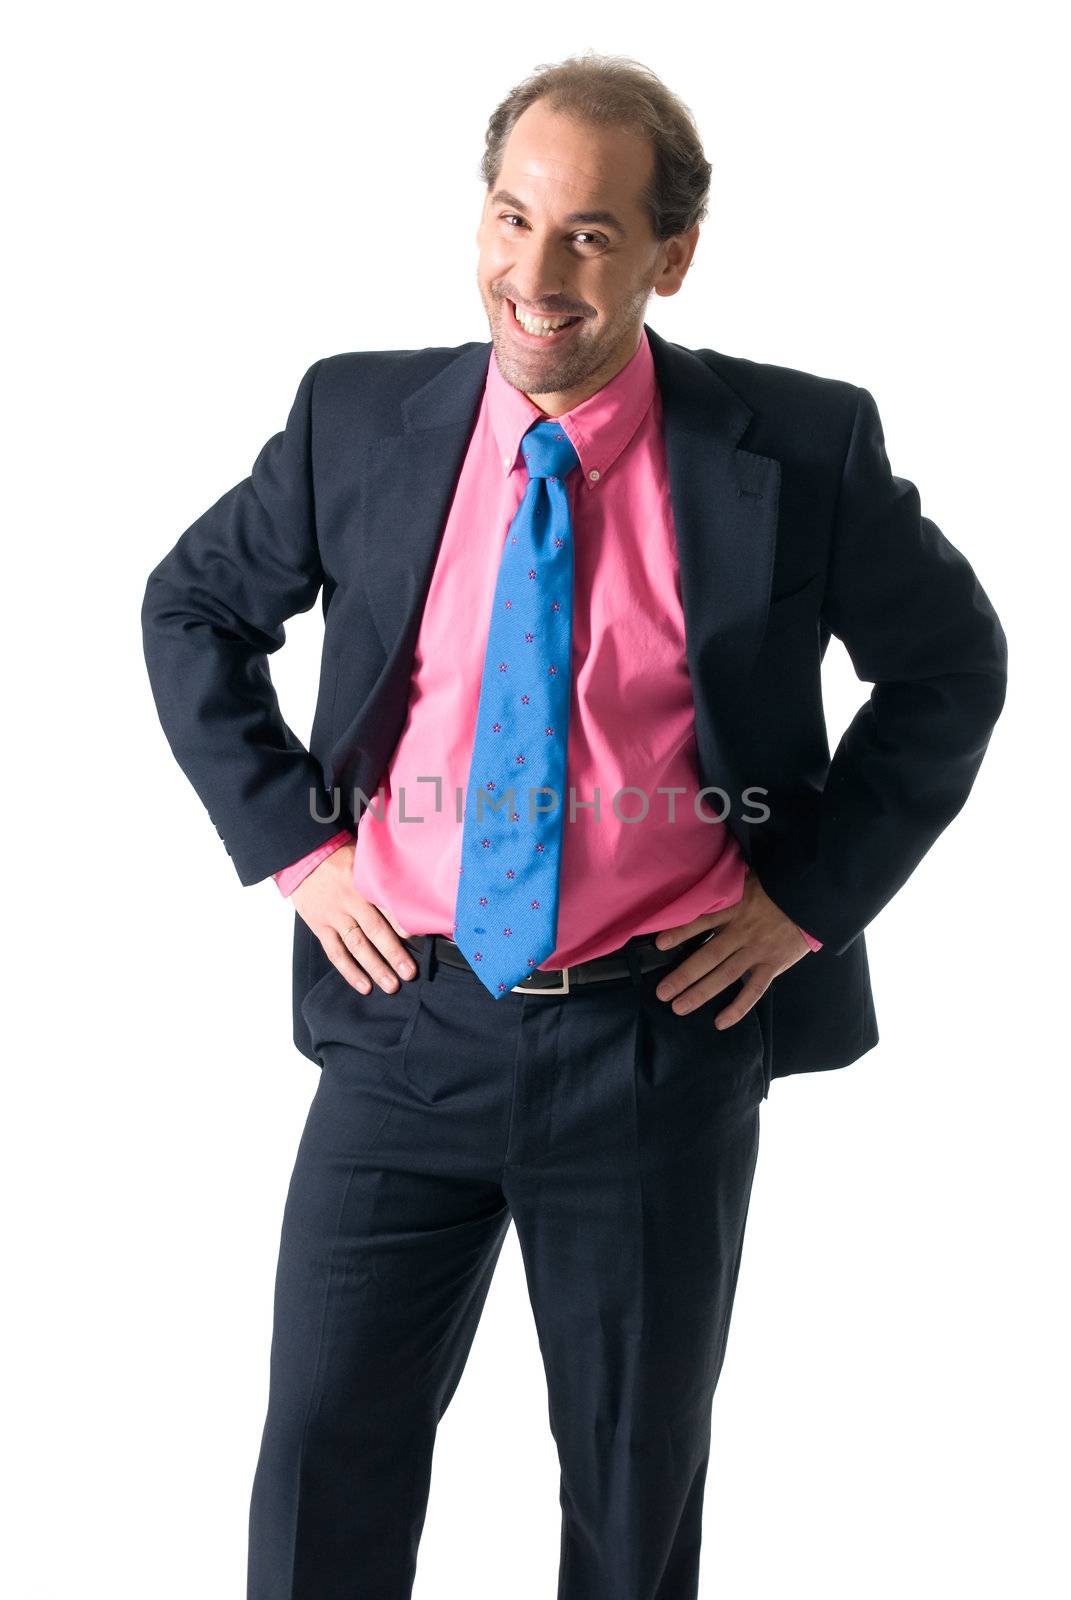 Businessman with pink shirt laughing on white background